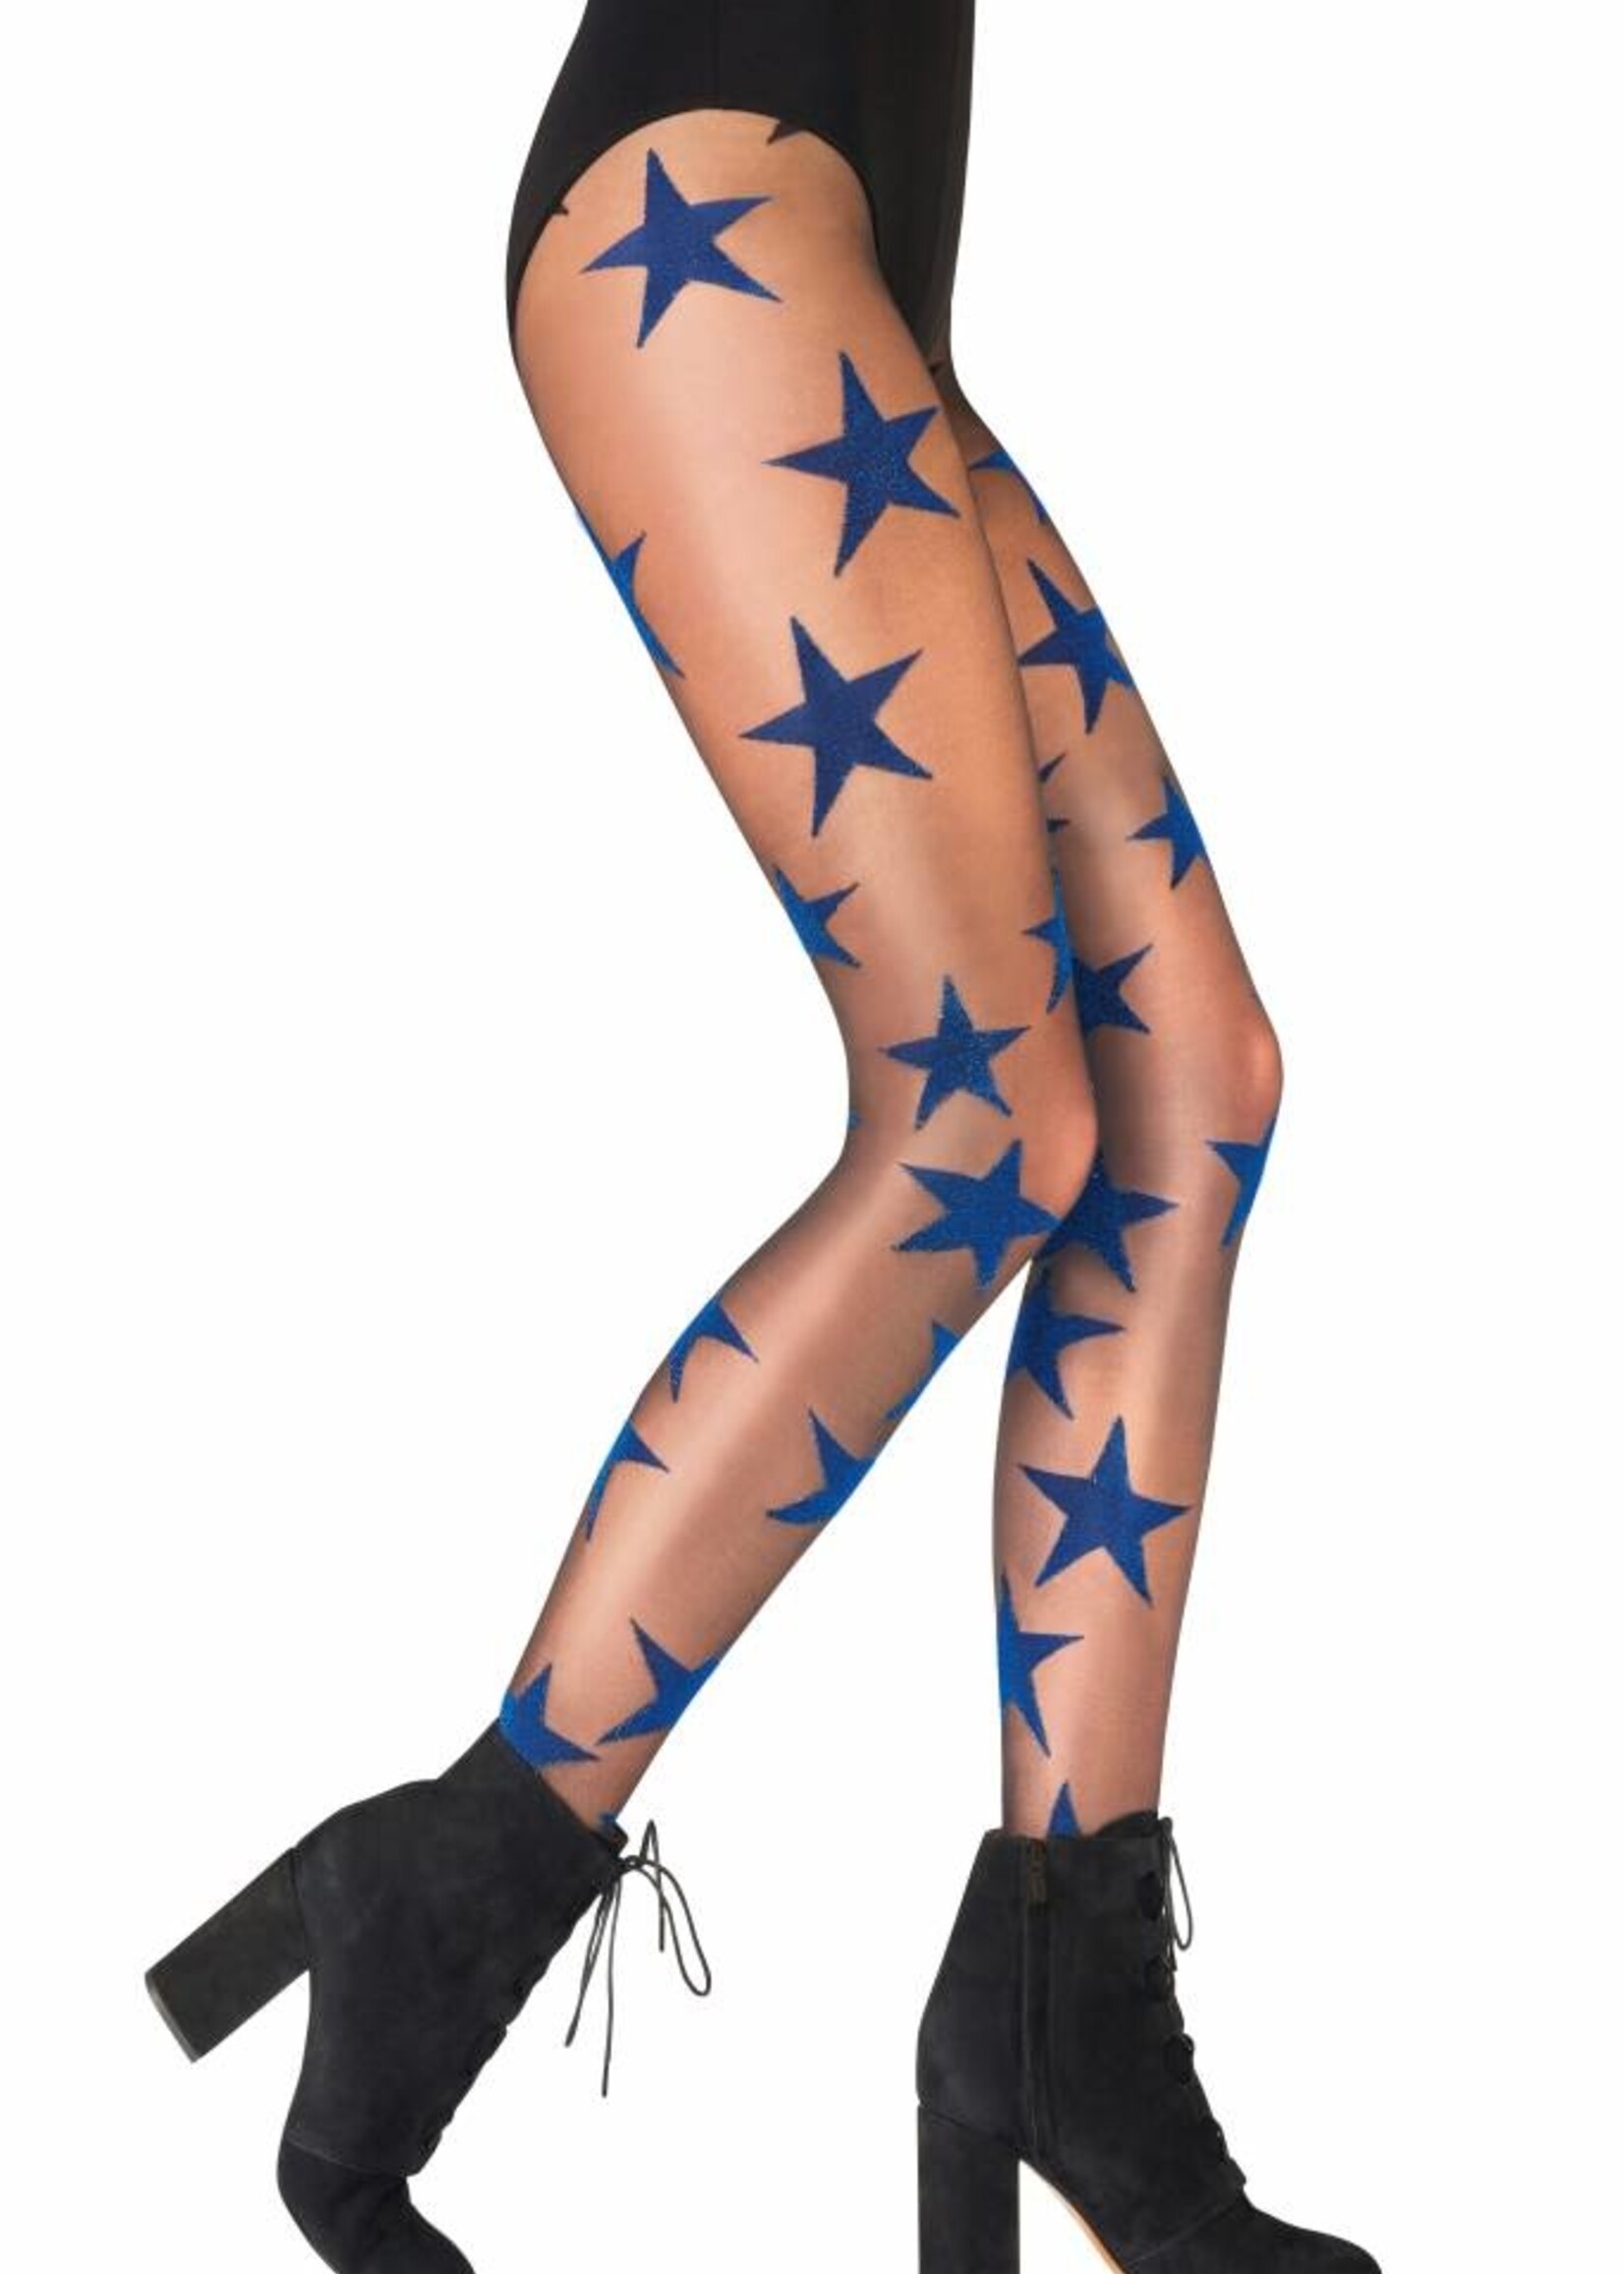 House of Holland  Sparkly Blue Star panty